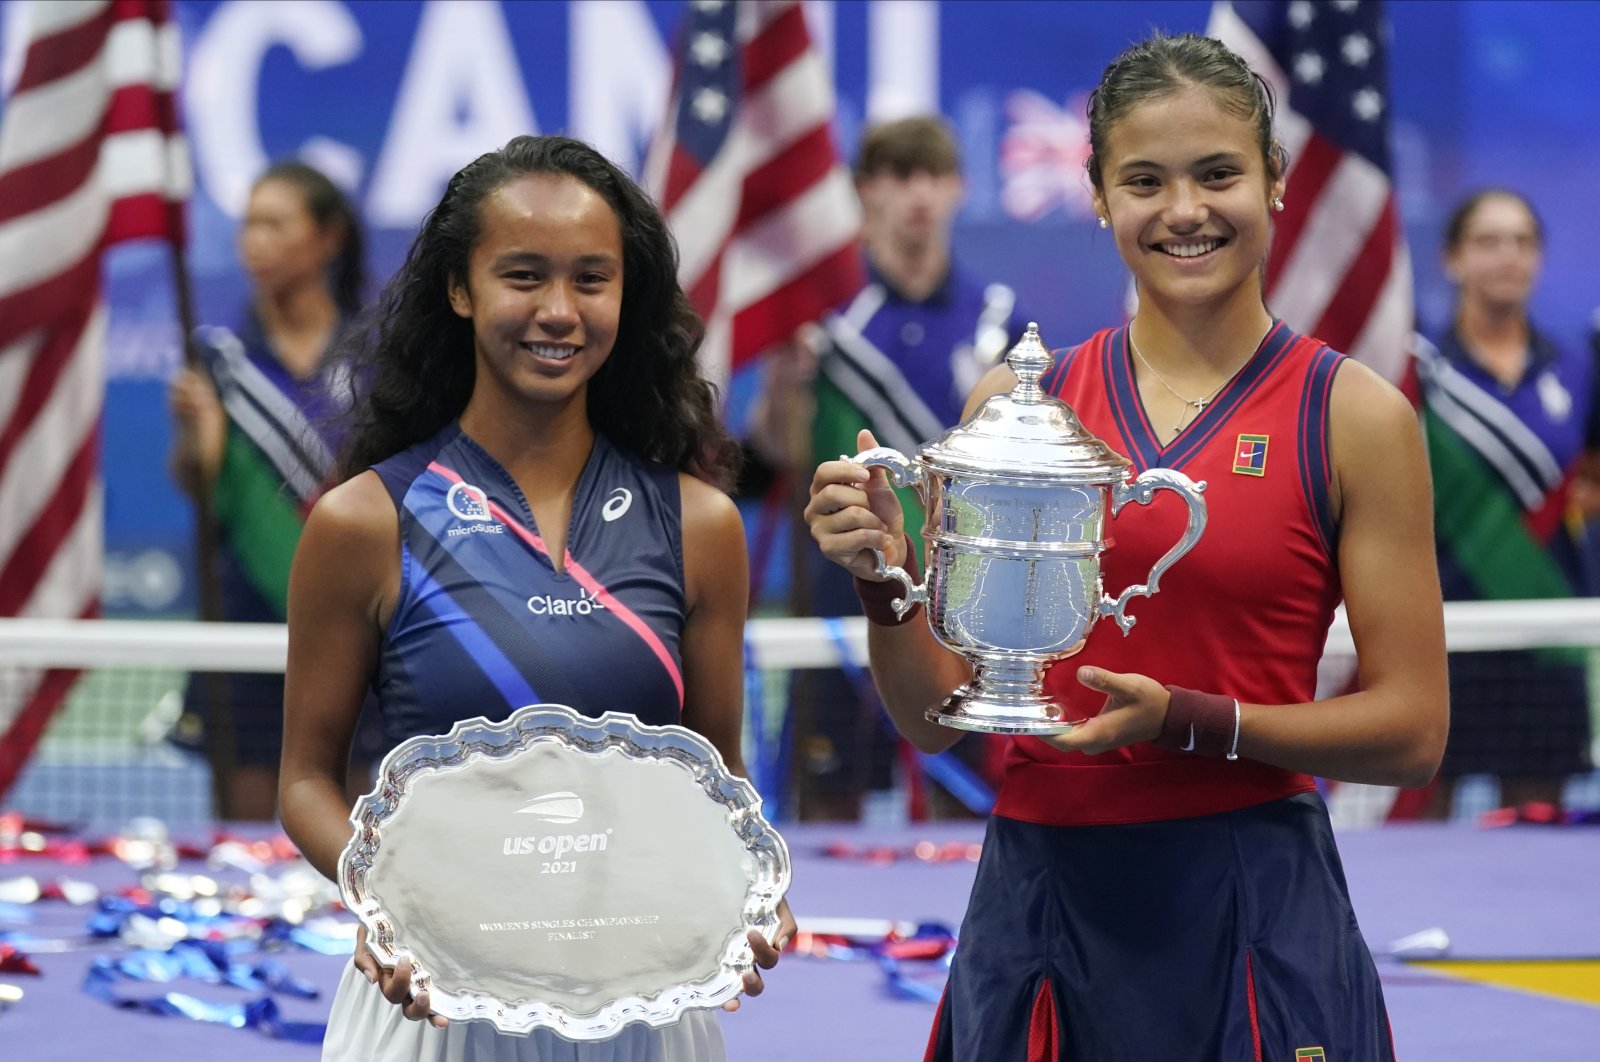 Leylah Fernandez, of Canada, left, and Emma Raducanu, of Britain, pose for photos after Raducanu defeated Fernandez in the women's singles final of the US Open tennis championships, Saturday, Sept. 11, 2021, in New York. (AP Photo/Seth Wenig)